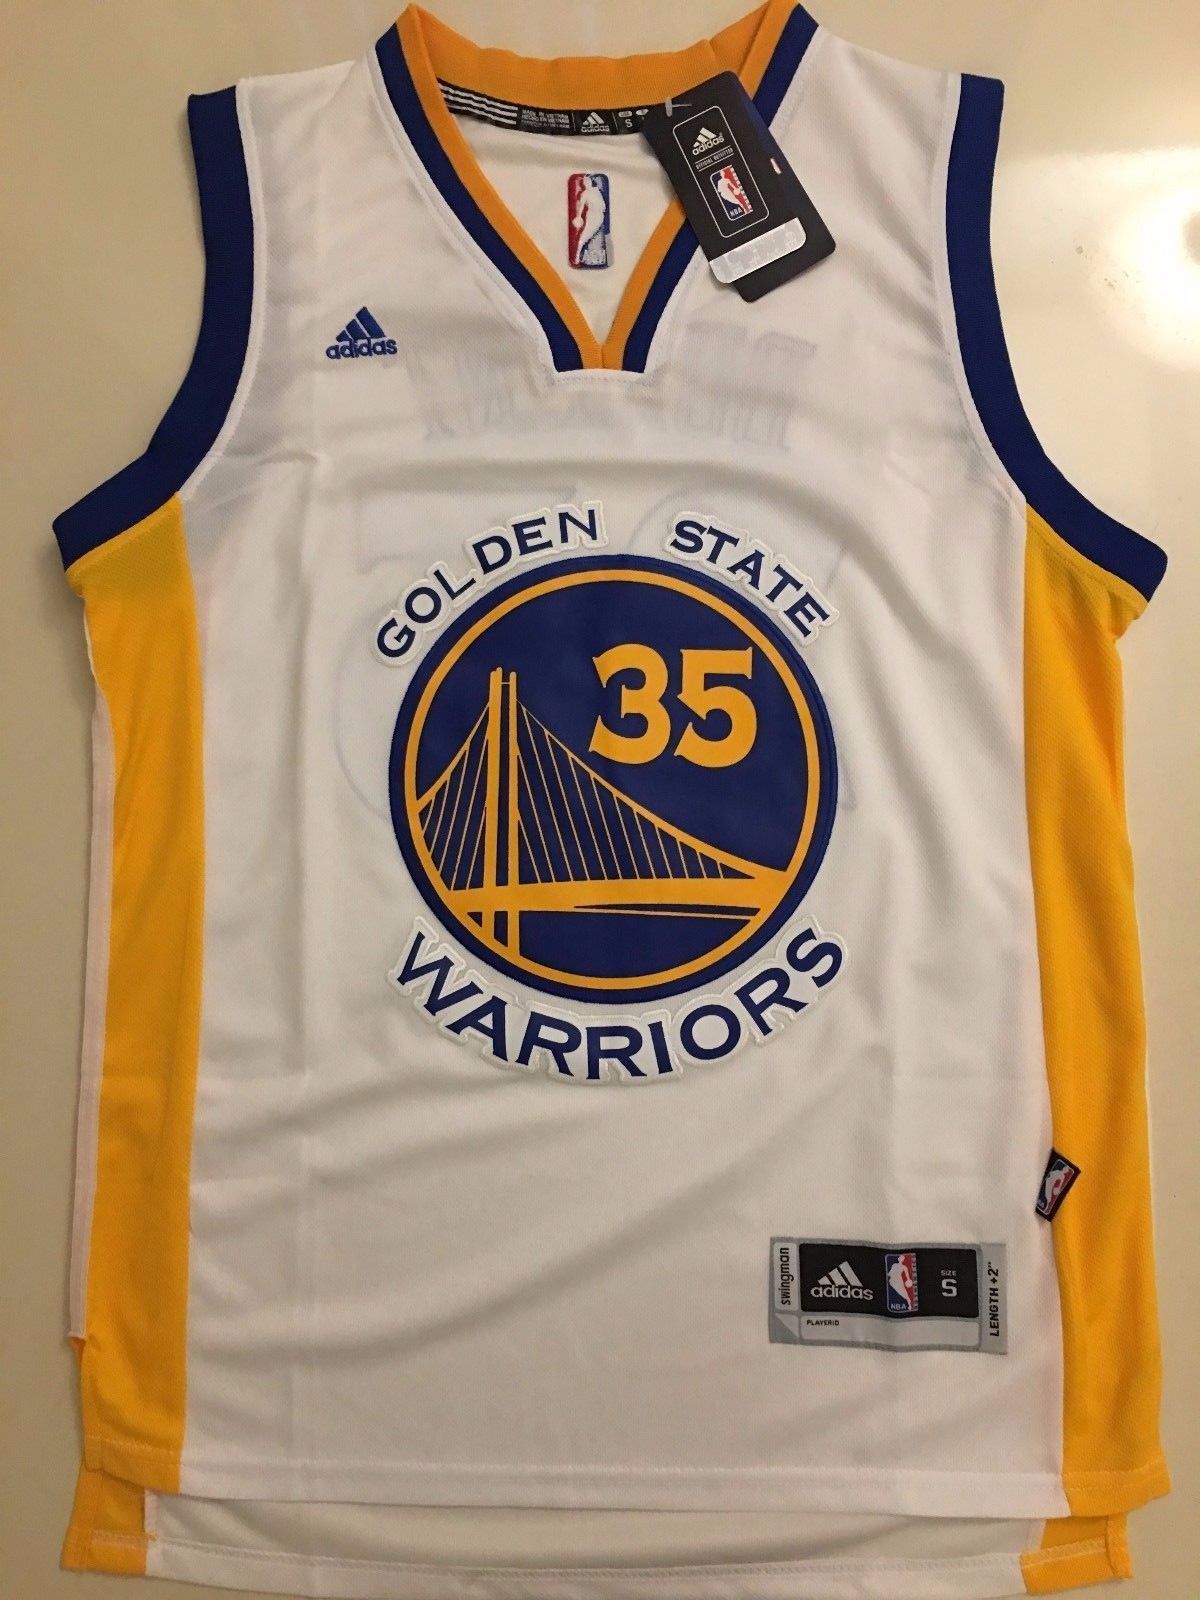 where can i buy a kevin durant jersey